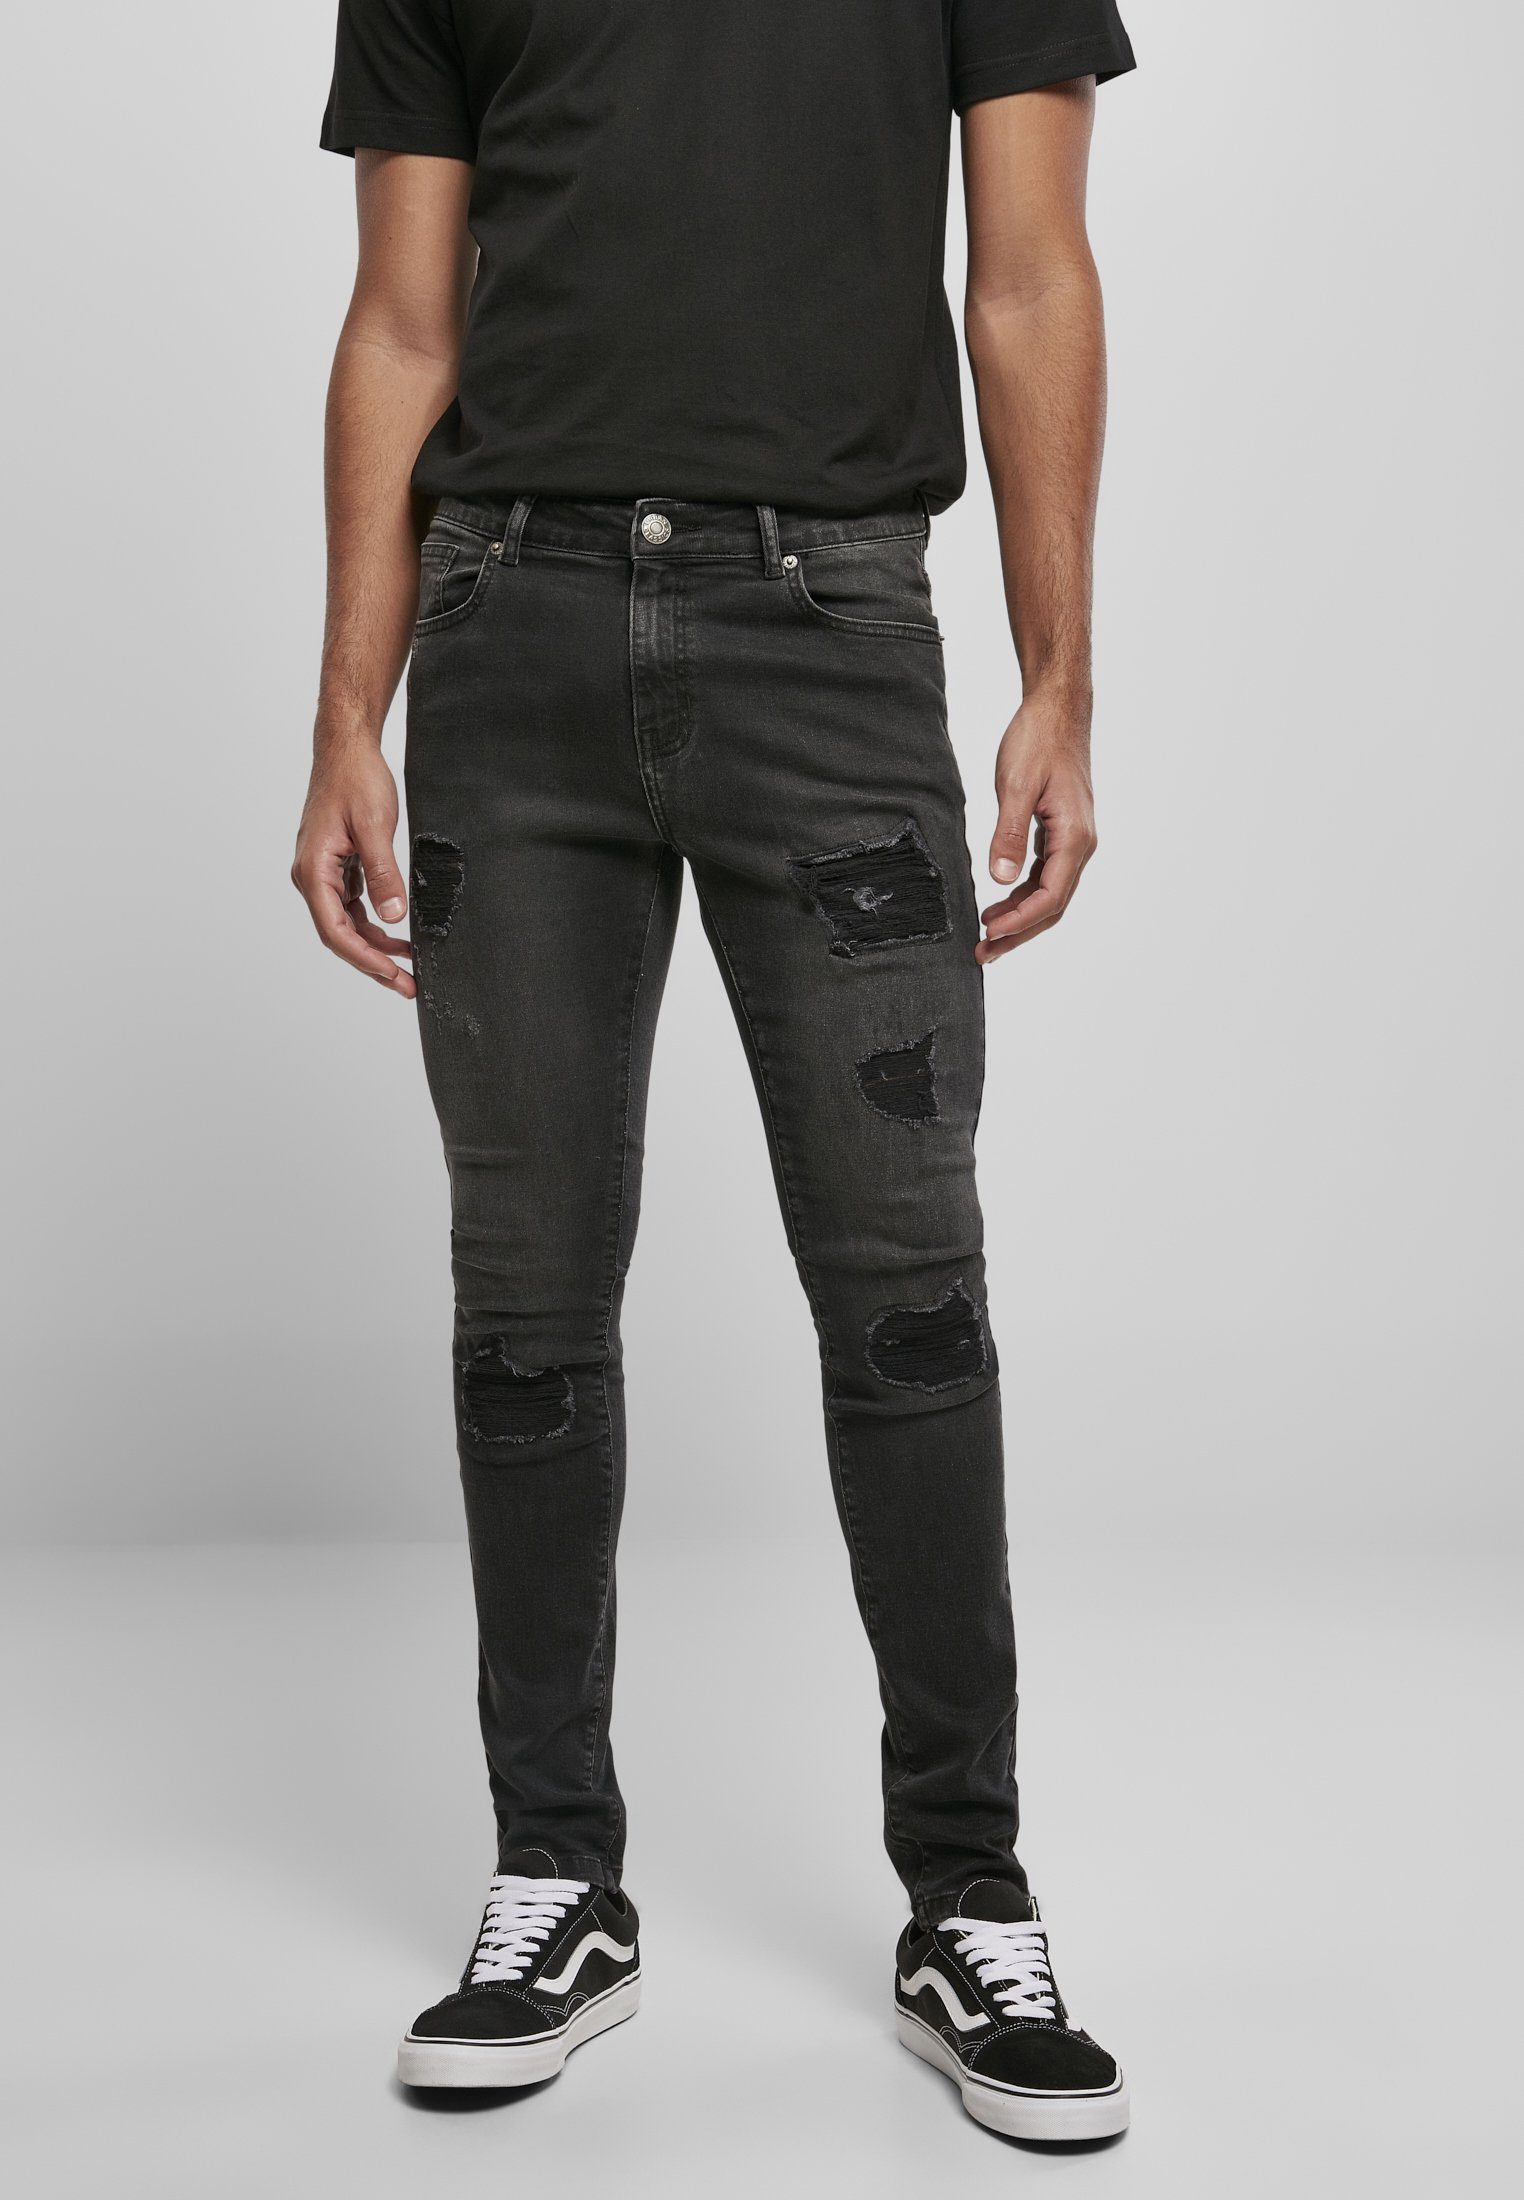 URBAN CLASSICS Bequeme Jeans Herren Heavy Destroyed Slim Fit Jeans (1-tlg) realblack heavy destroyed washed